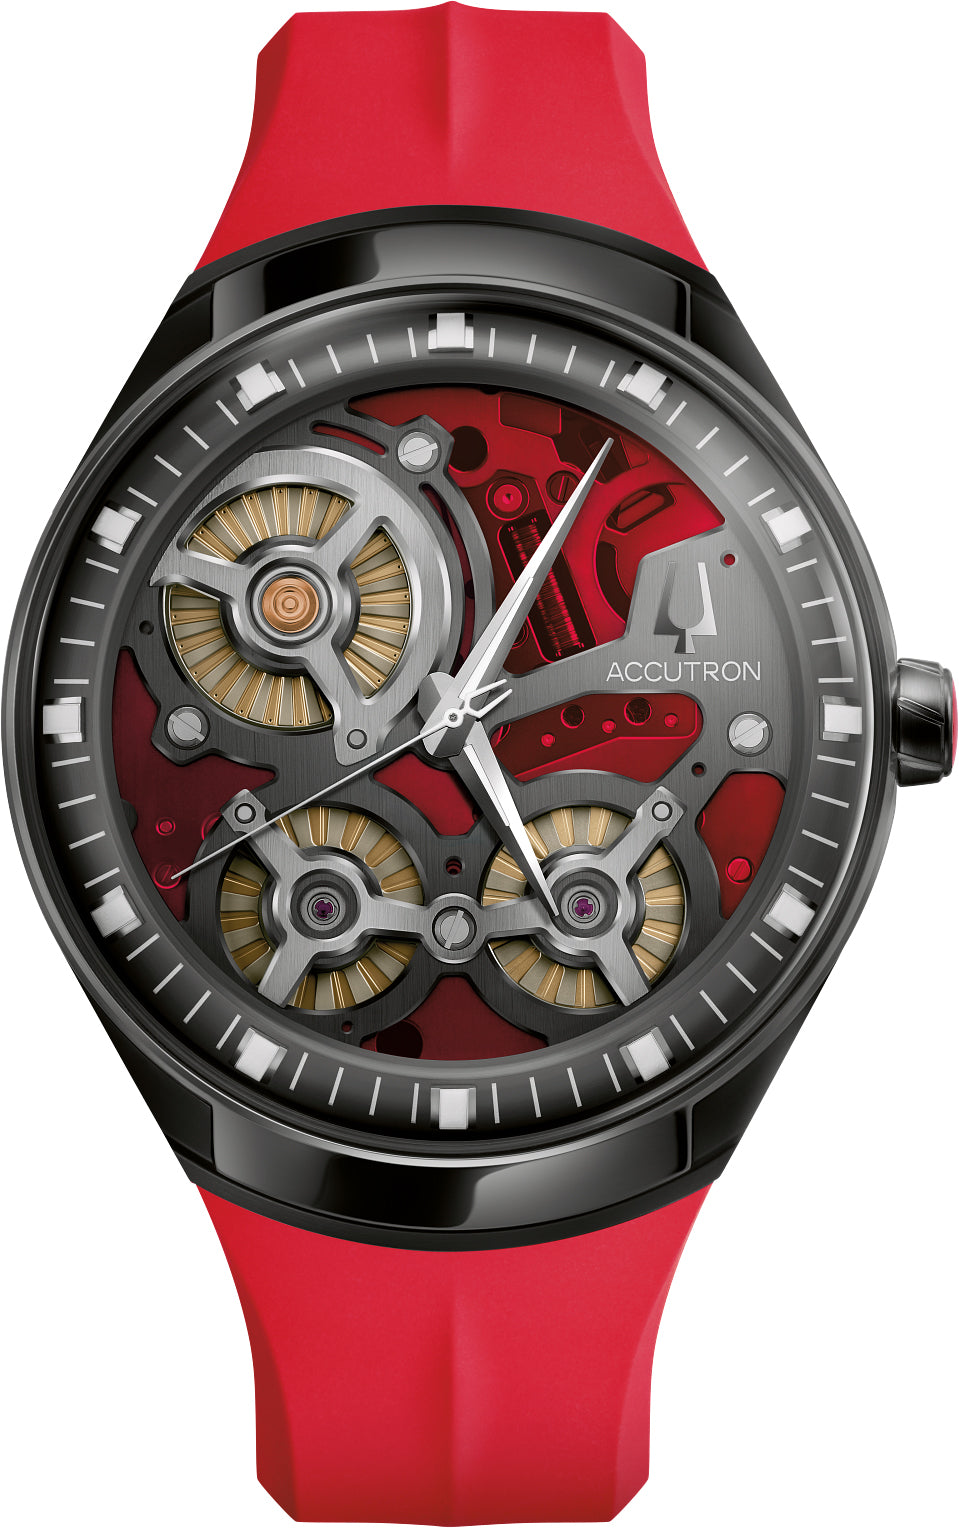 Accutron Watch DNA Casino Red Limited Edition